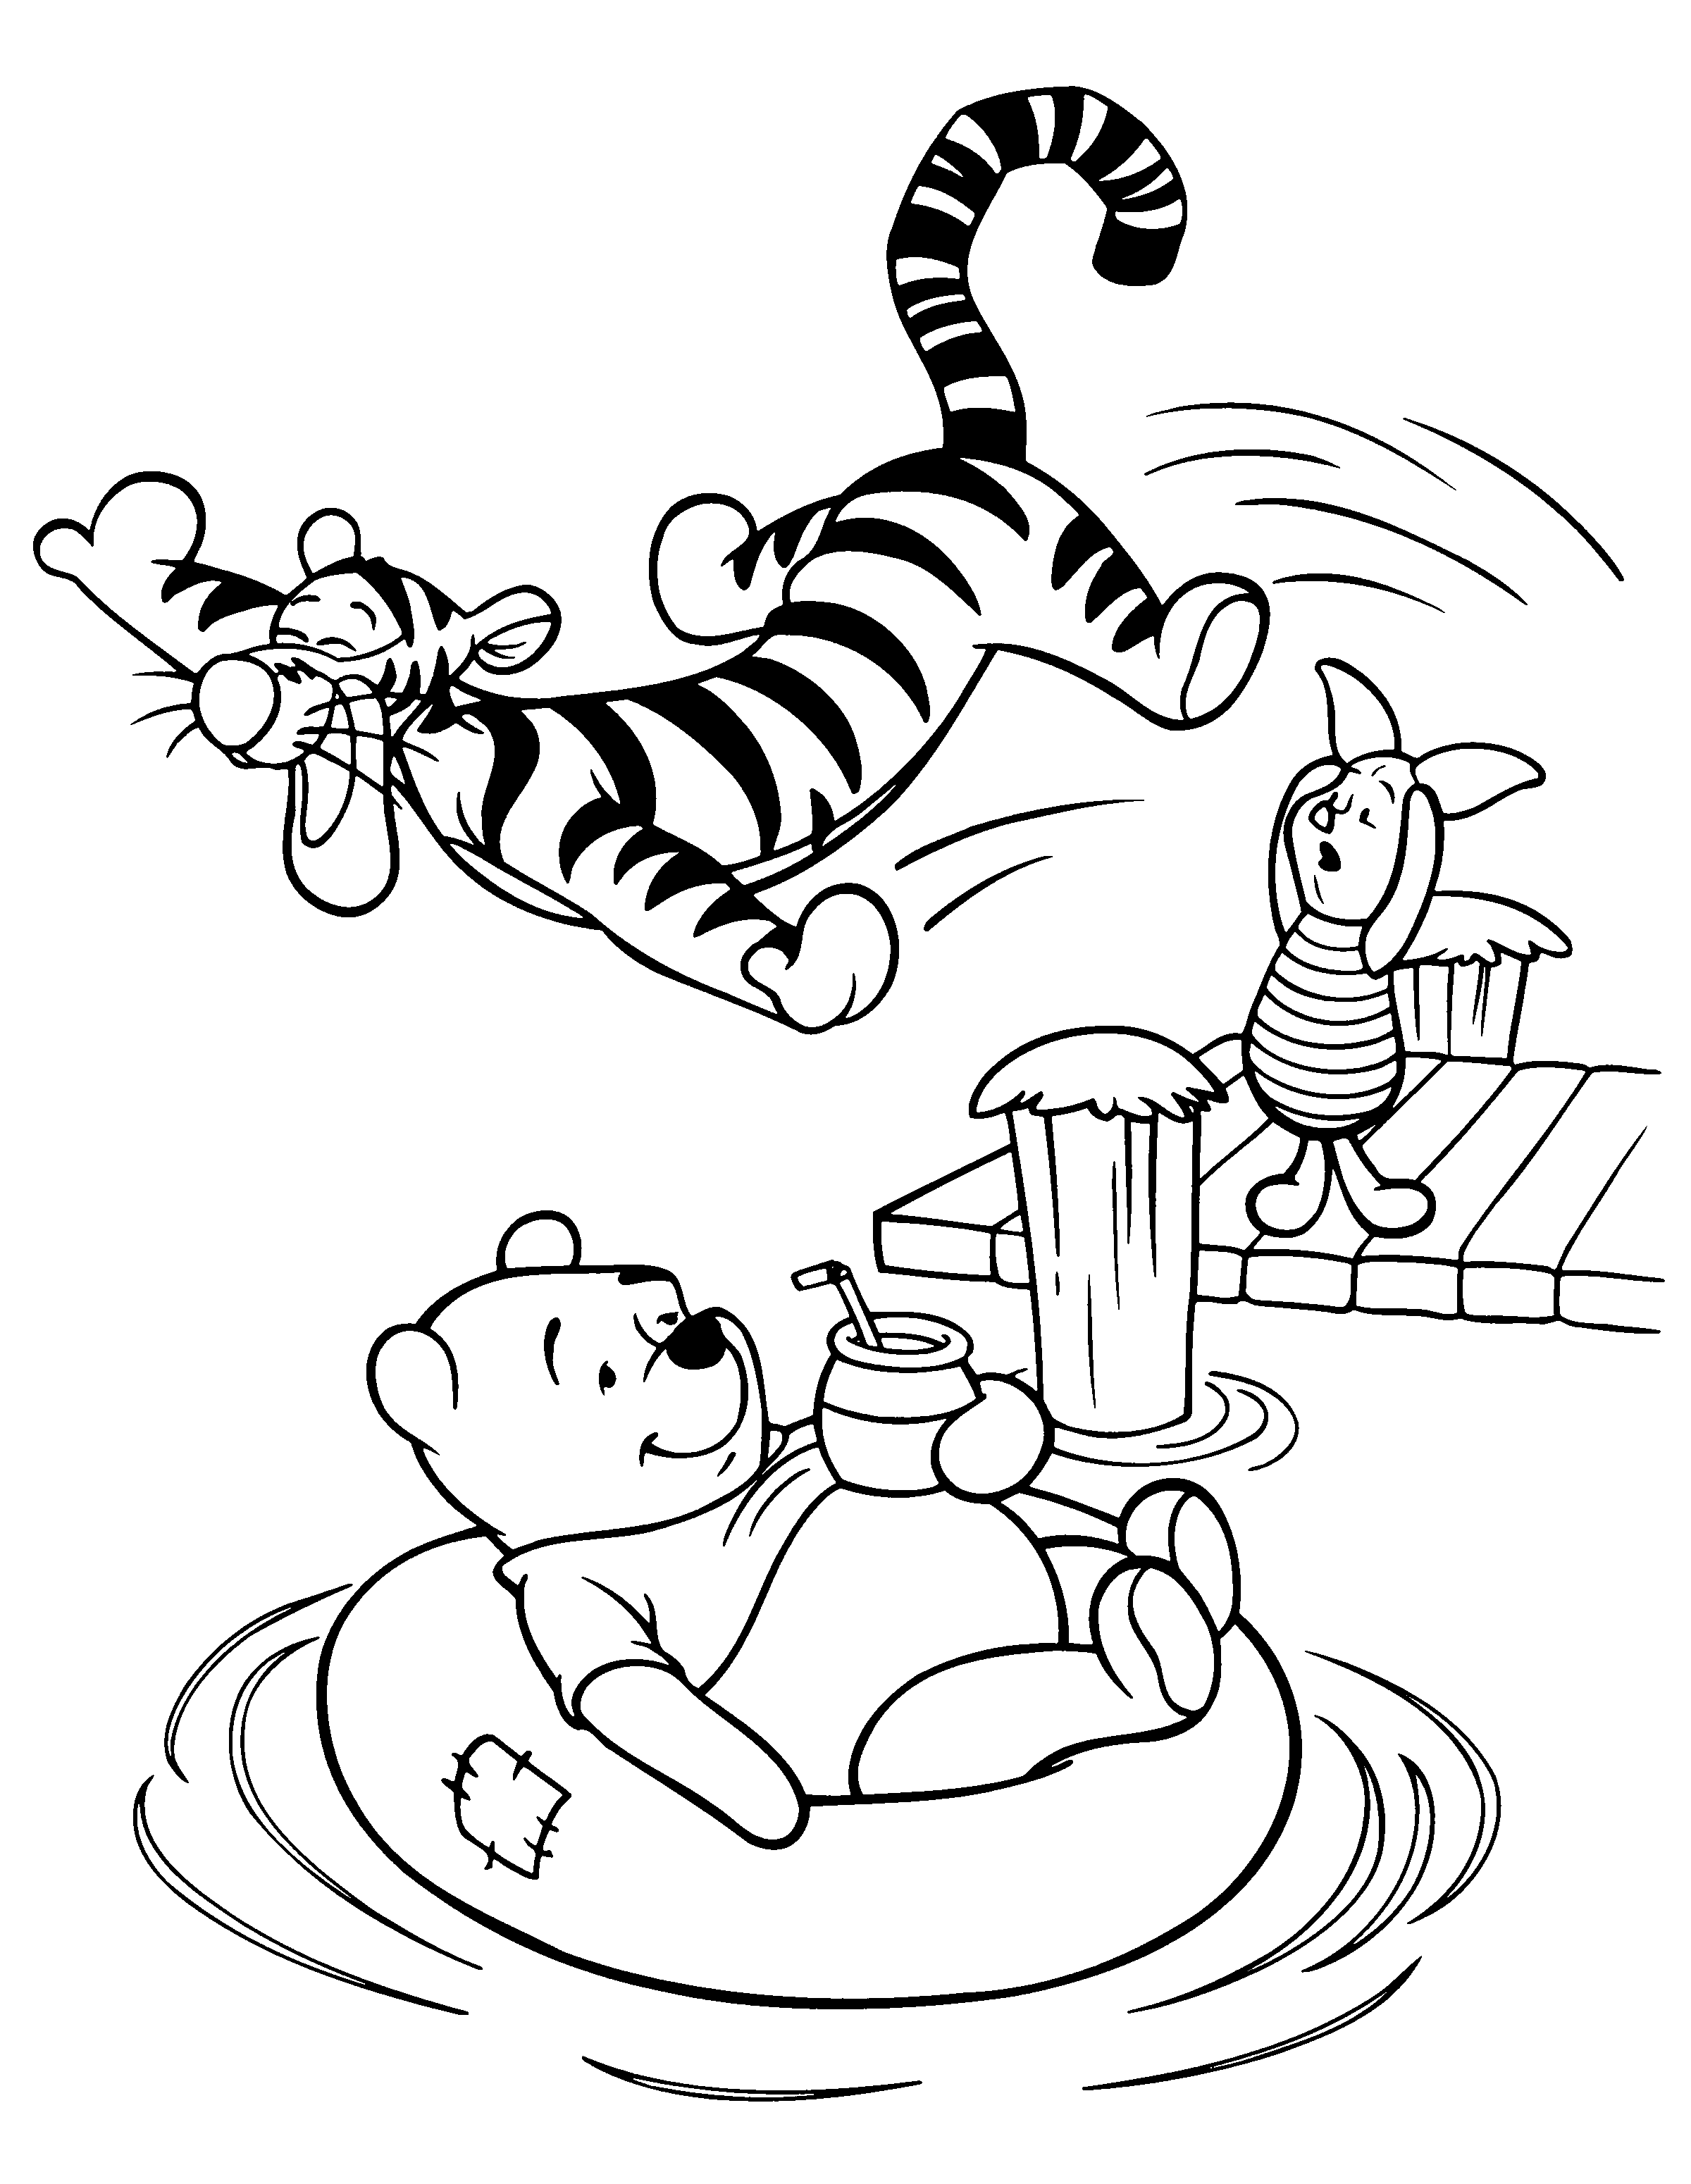 Oh No Tigger Winnie the Pooh Coloring Pages